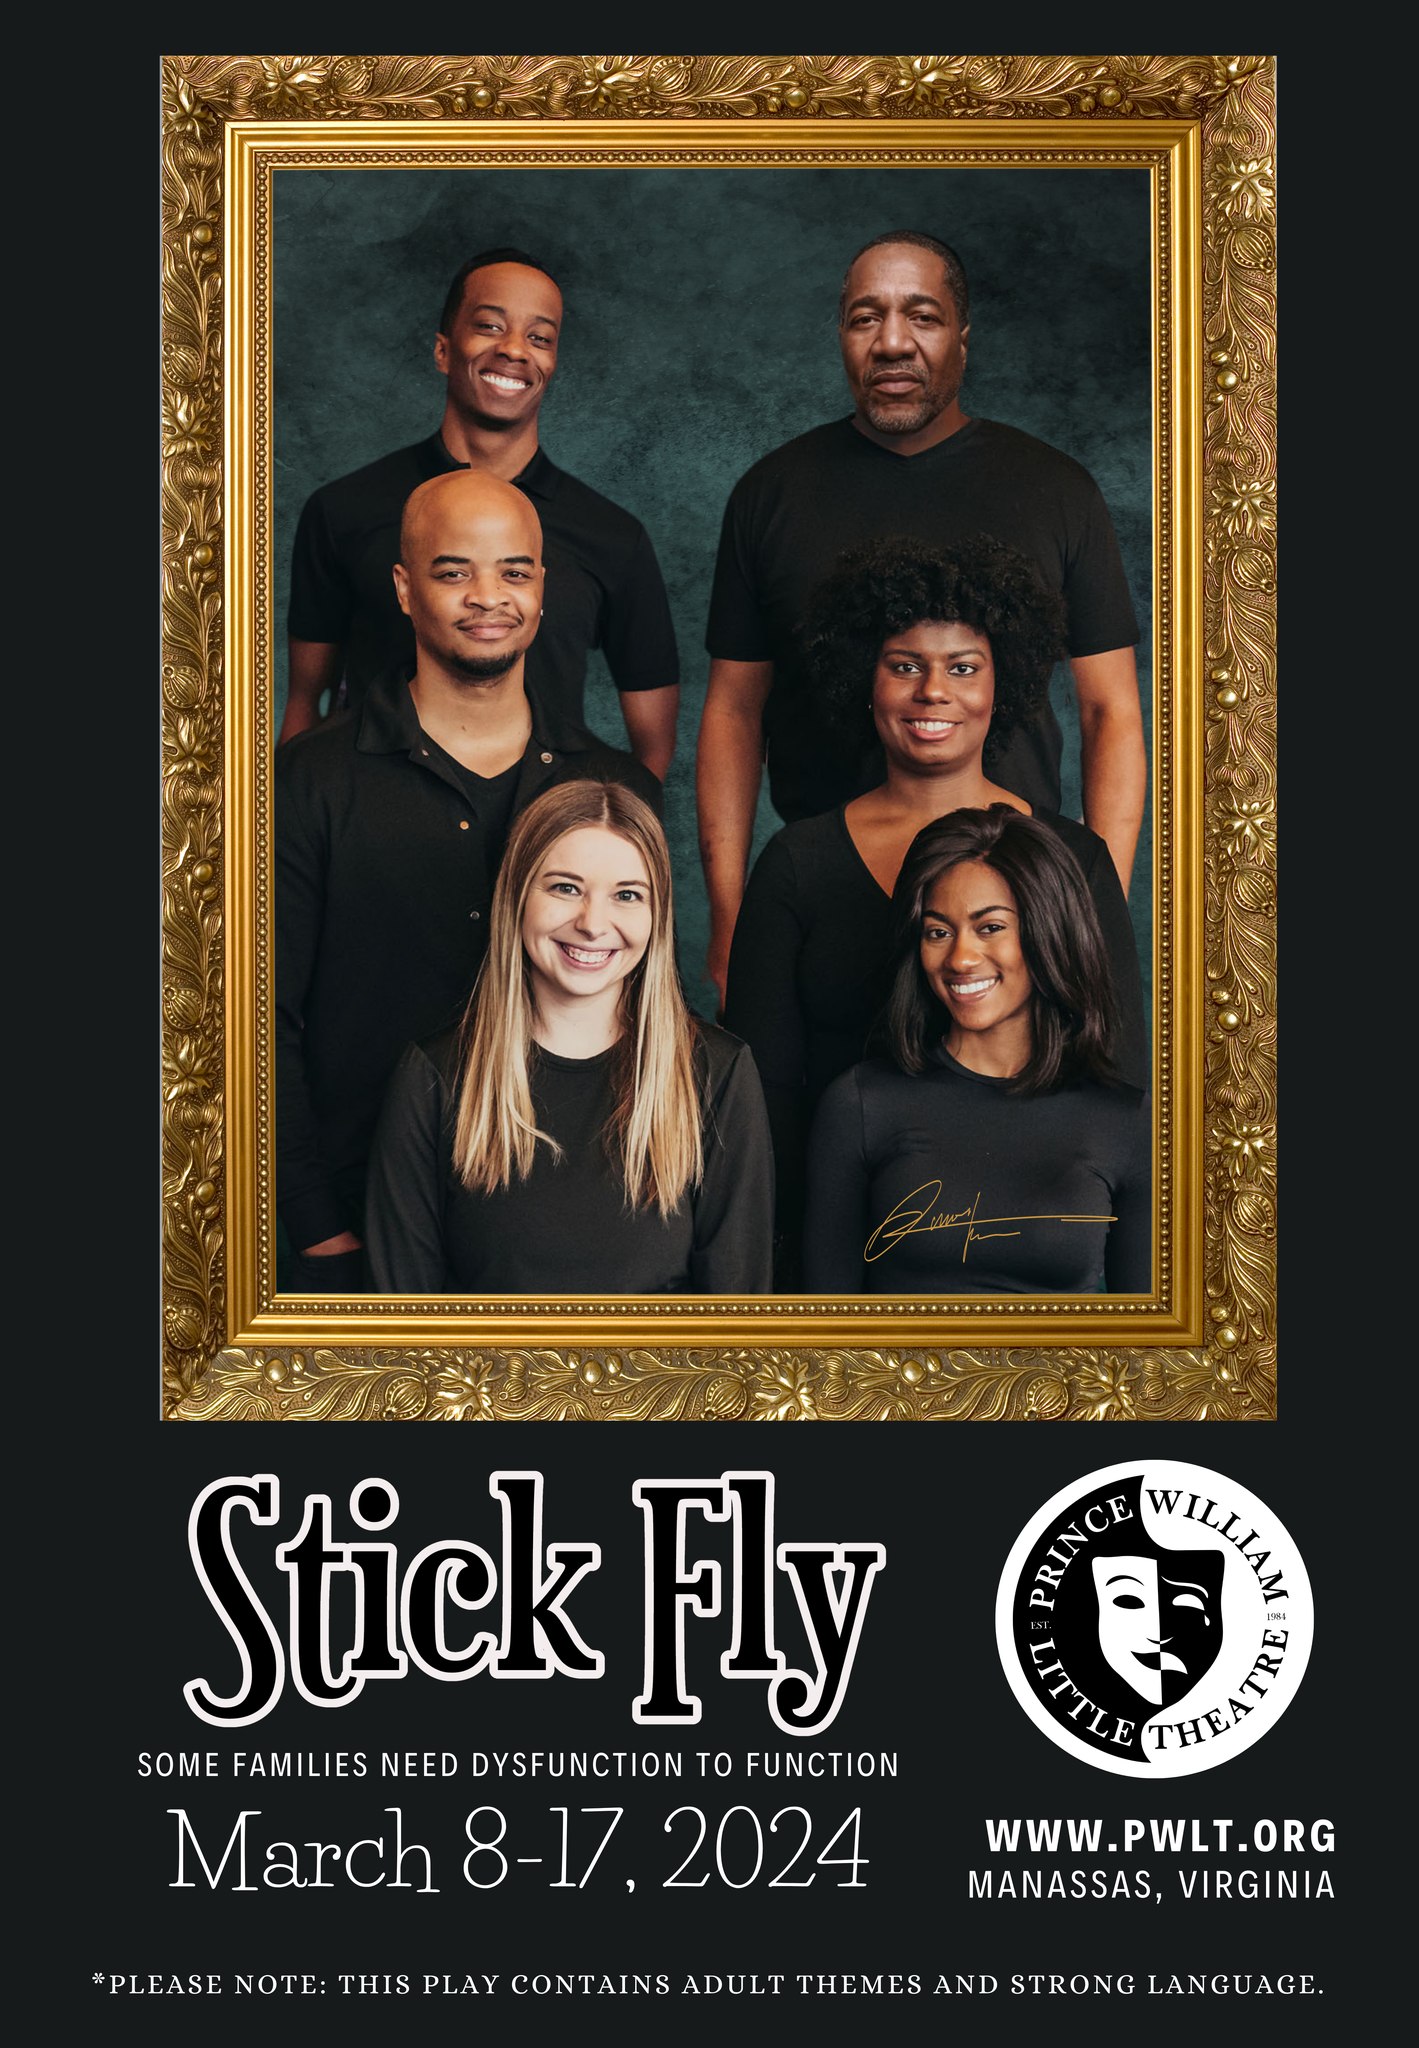 Prince William Little Theatre Presents Award-Winning Production “Stick Fly” by Lydia R.Diamond